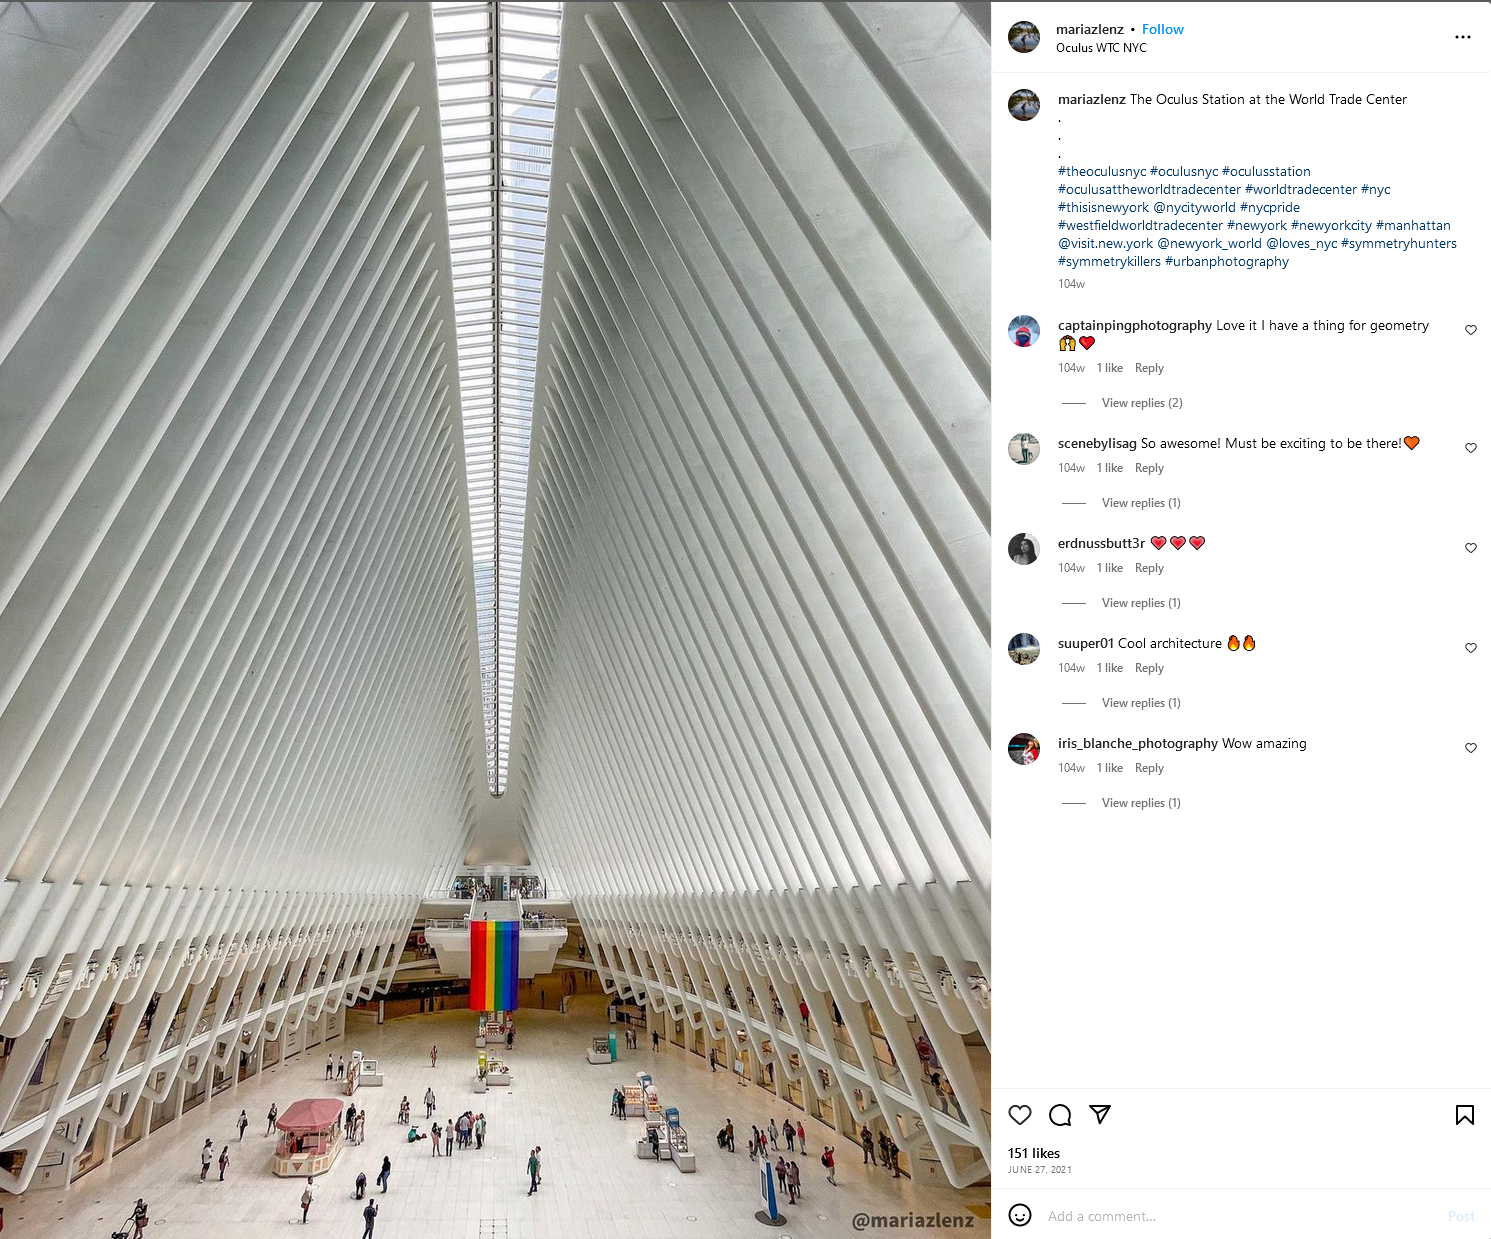 The Oculus at the World Trade Center by @mariazlenz